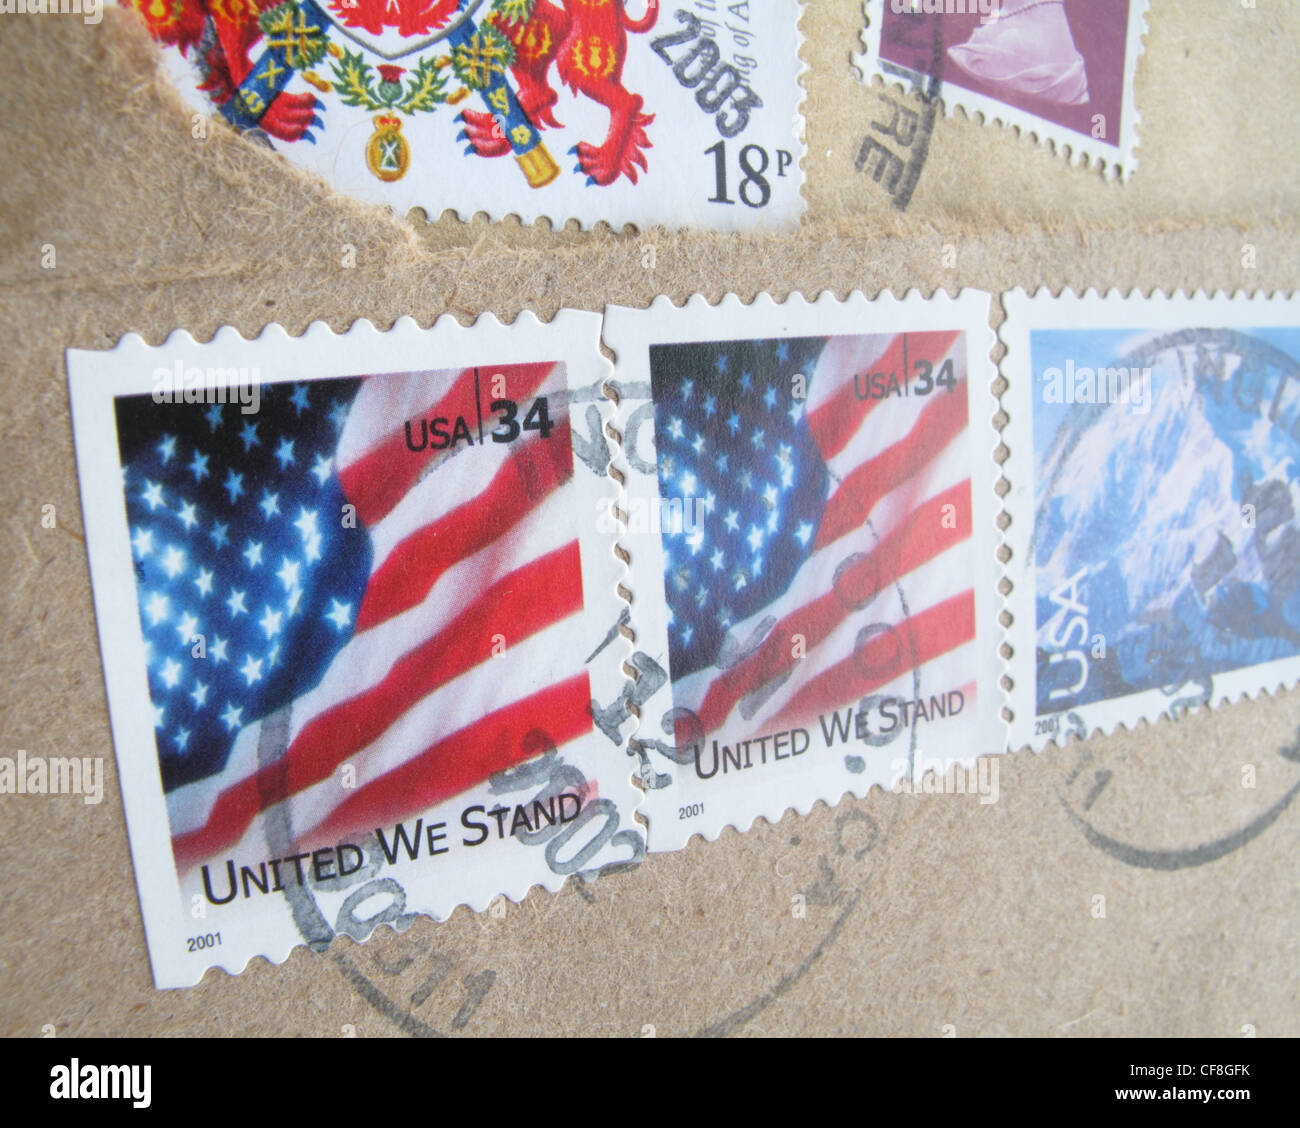 Franked American stamps showing the stars and stripes flag with the motto - In God we trust. Stock Photo